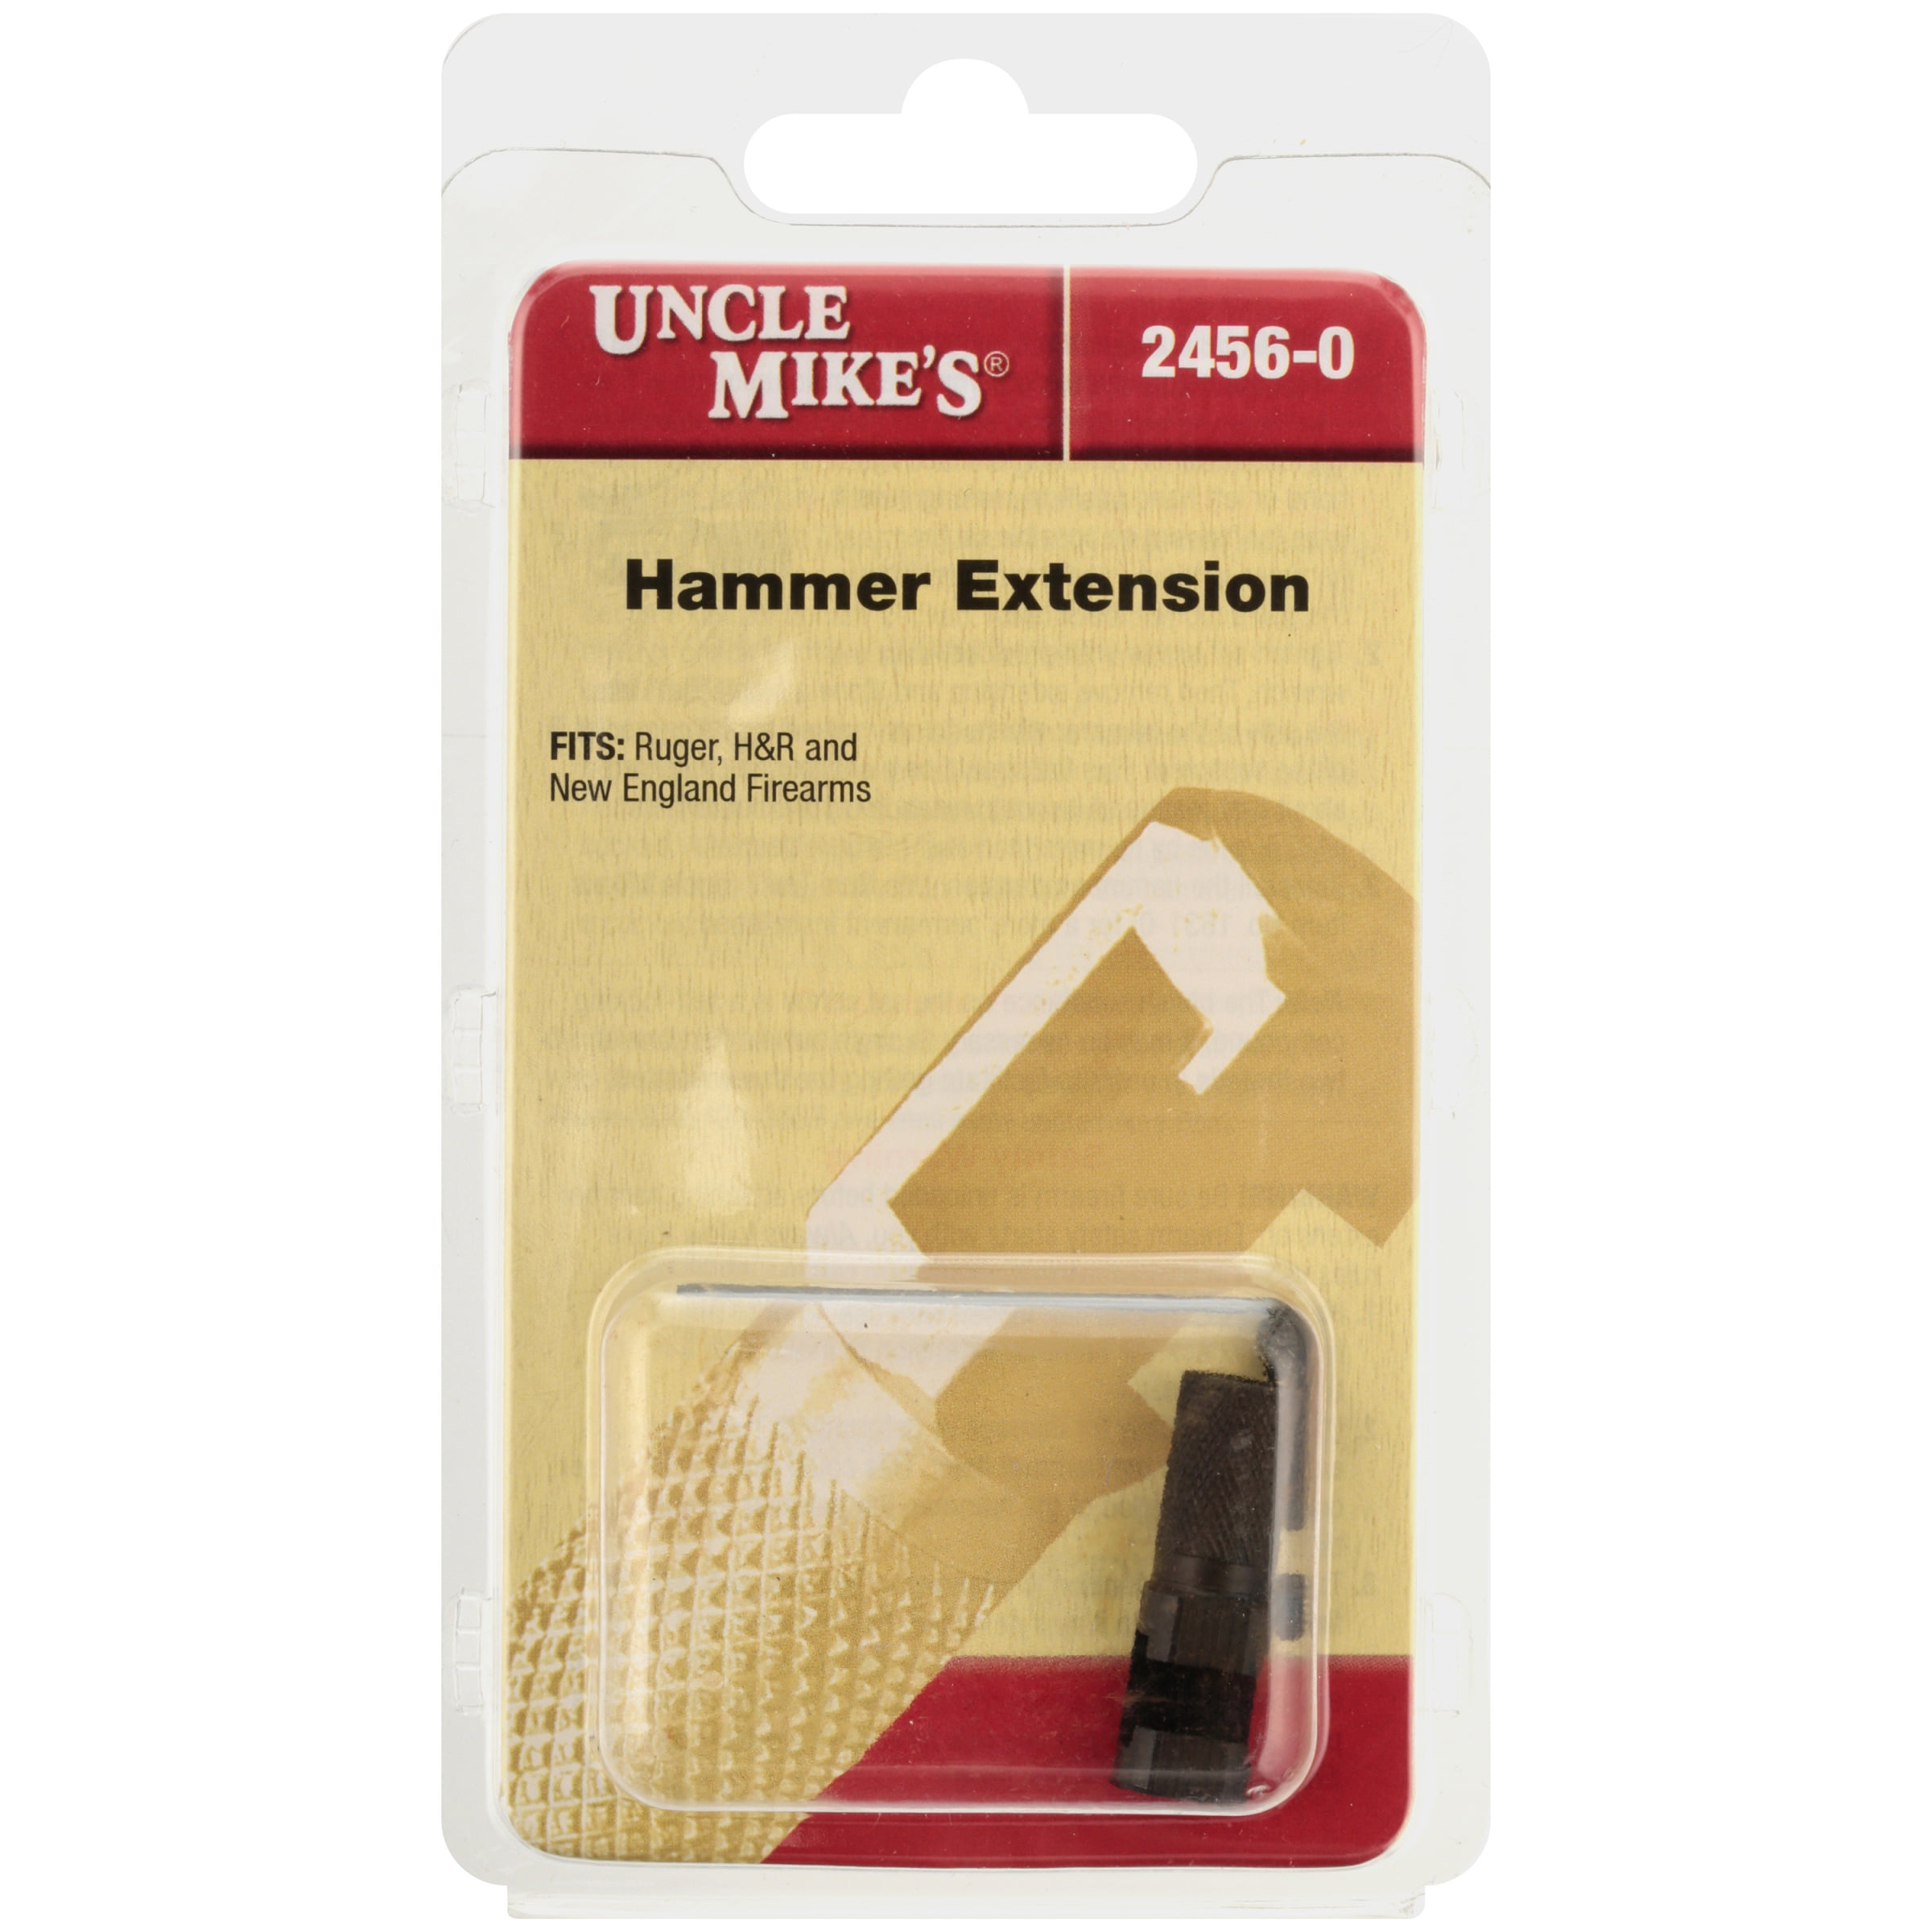 H&R NEW England Firearms Handi Rifle RUGER/TOPPER Hammer Extension for Ruger 